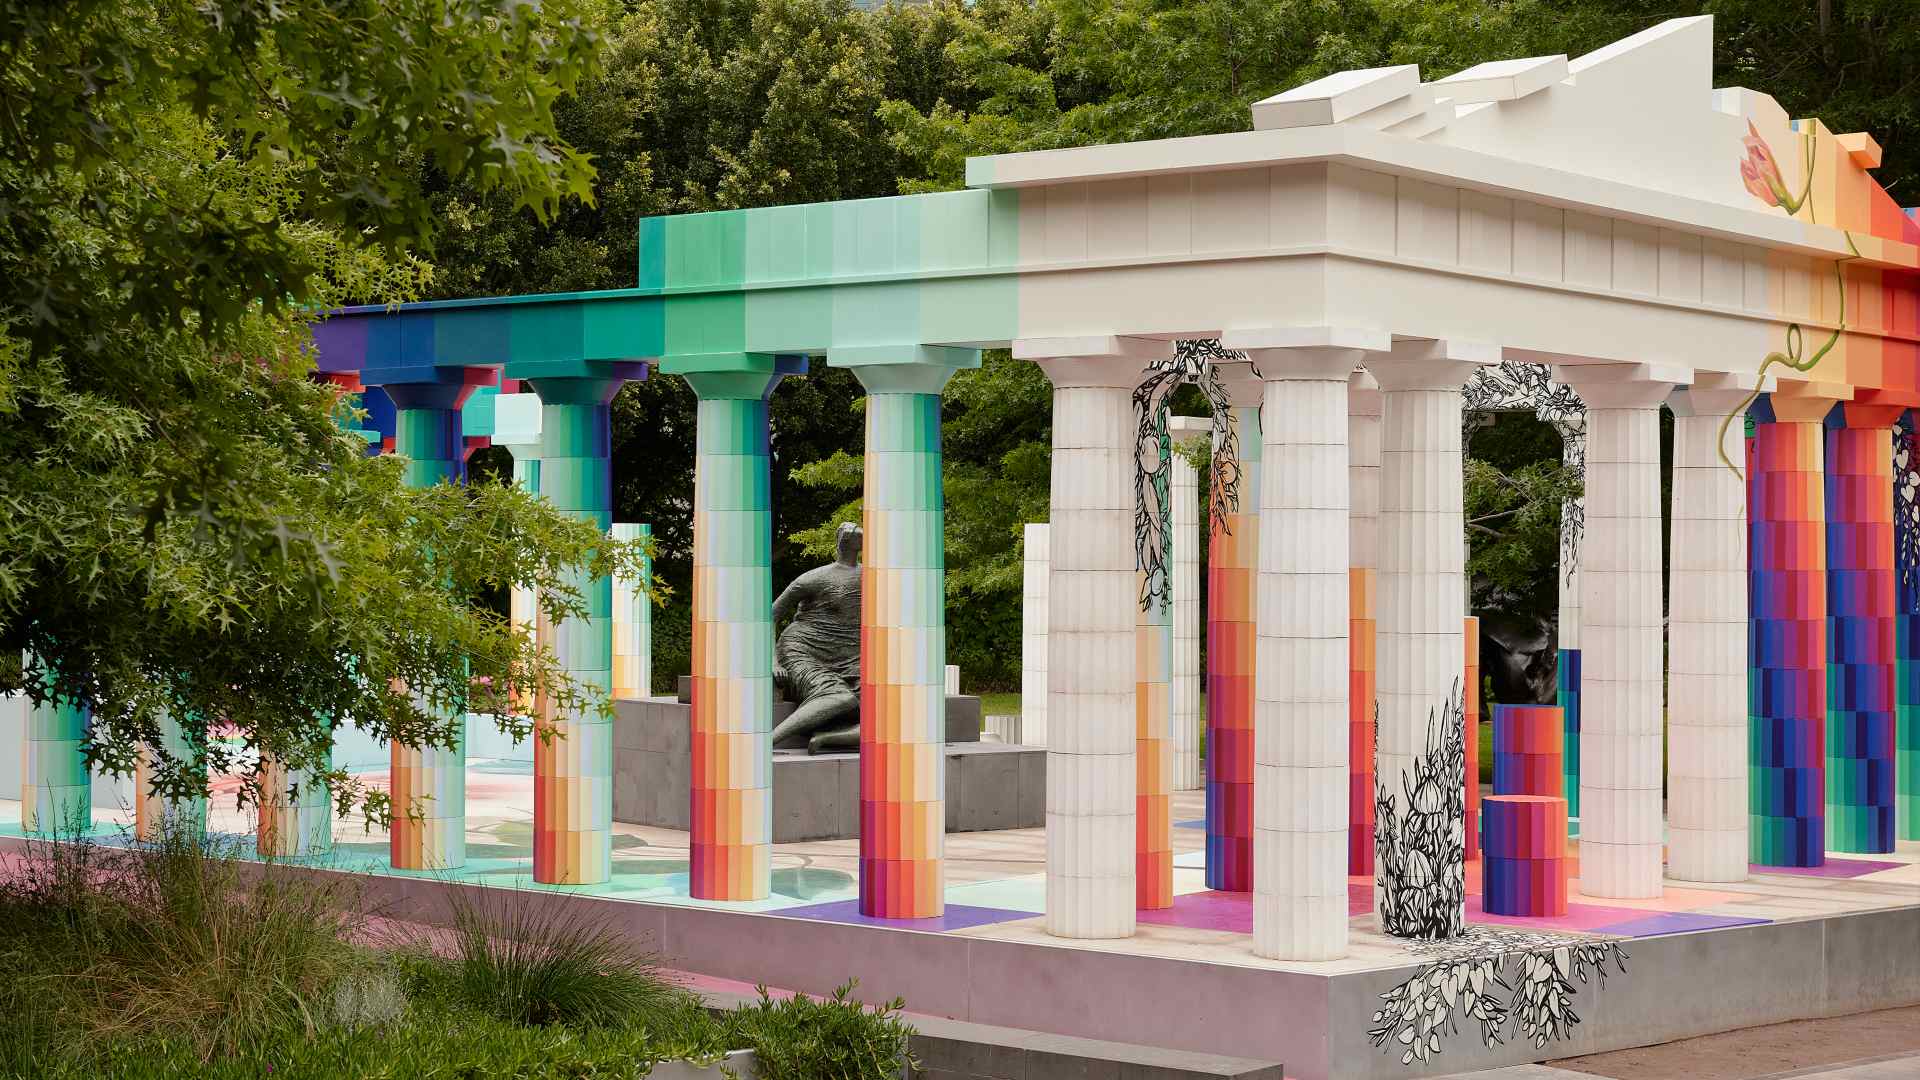 Melbourne Is Now Home to a Colourful Mini Parthenon Replica Called 'Temple of Boom'